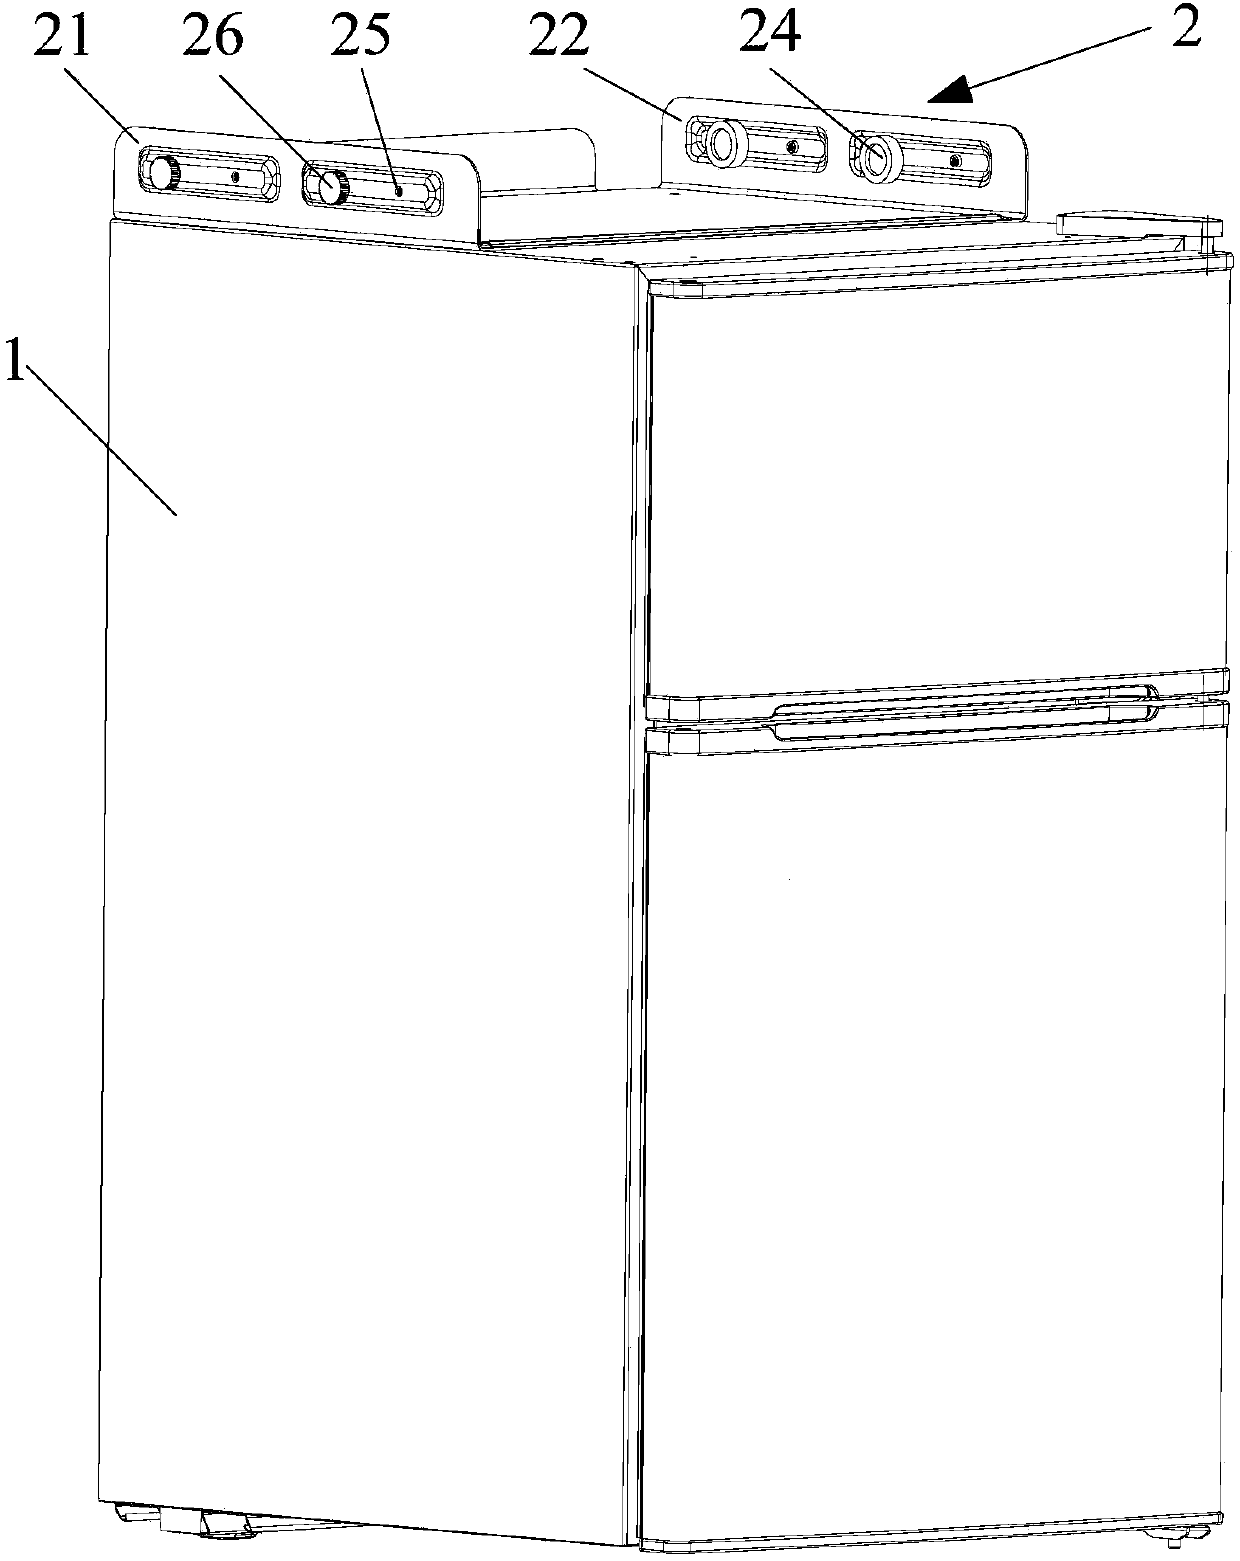 Refrigerator structure and appliance combination